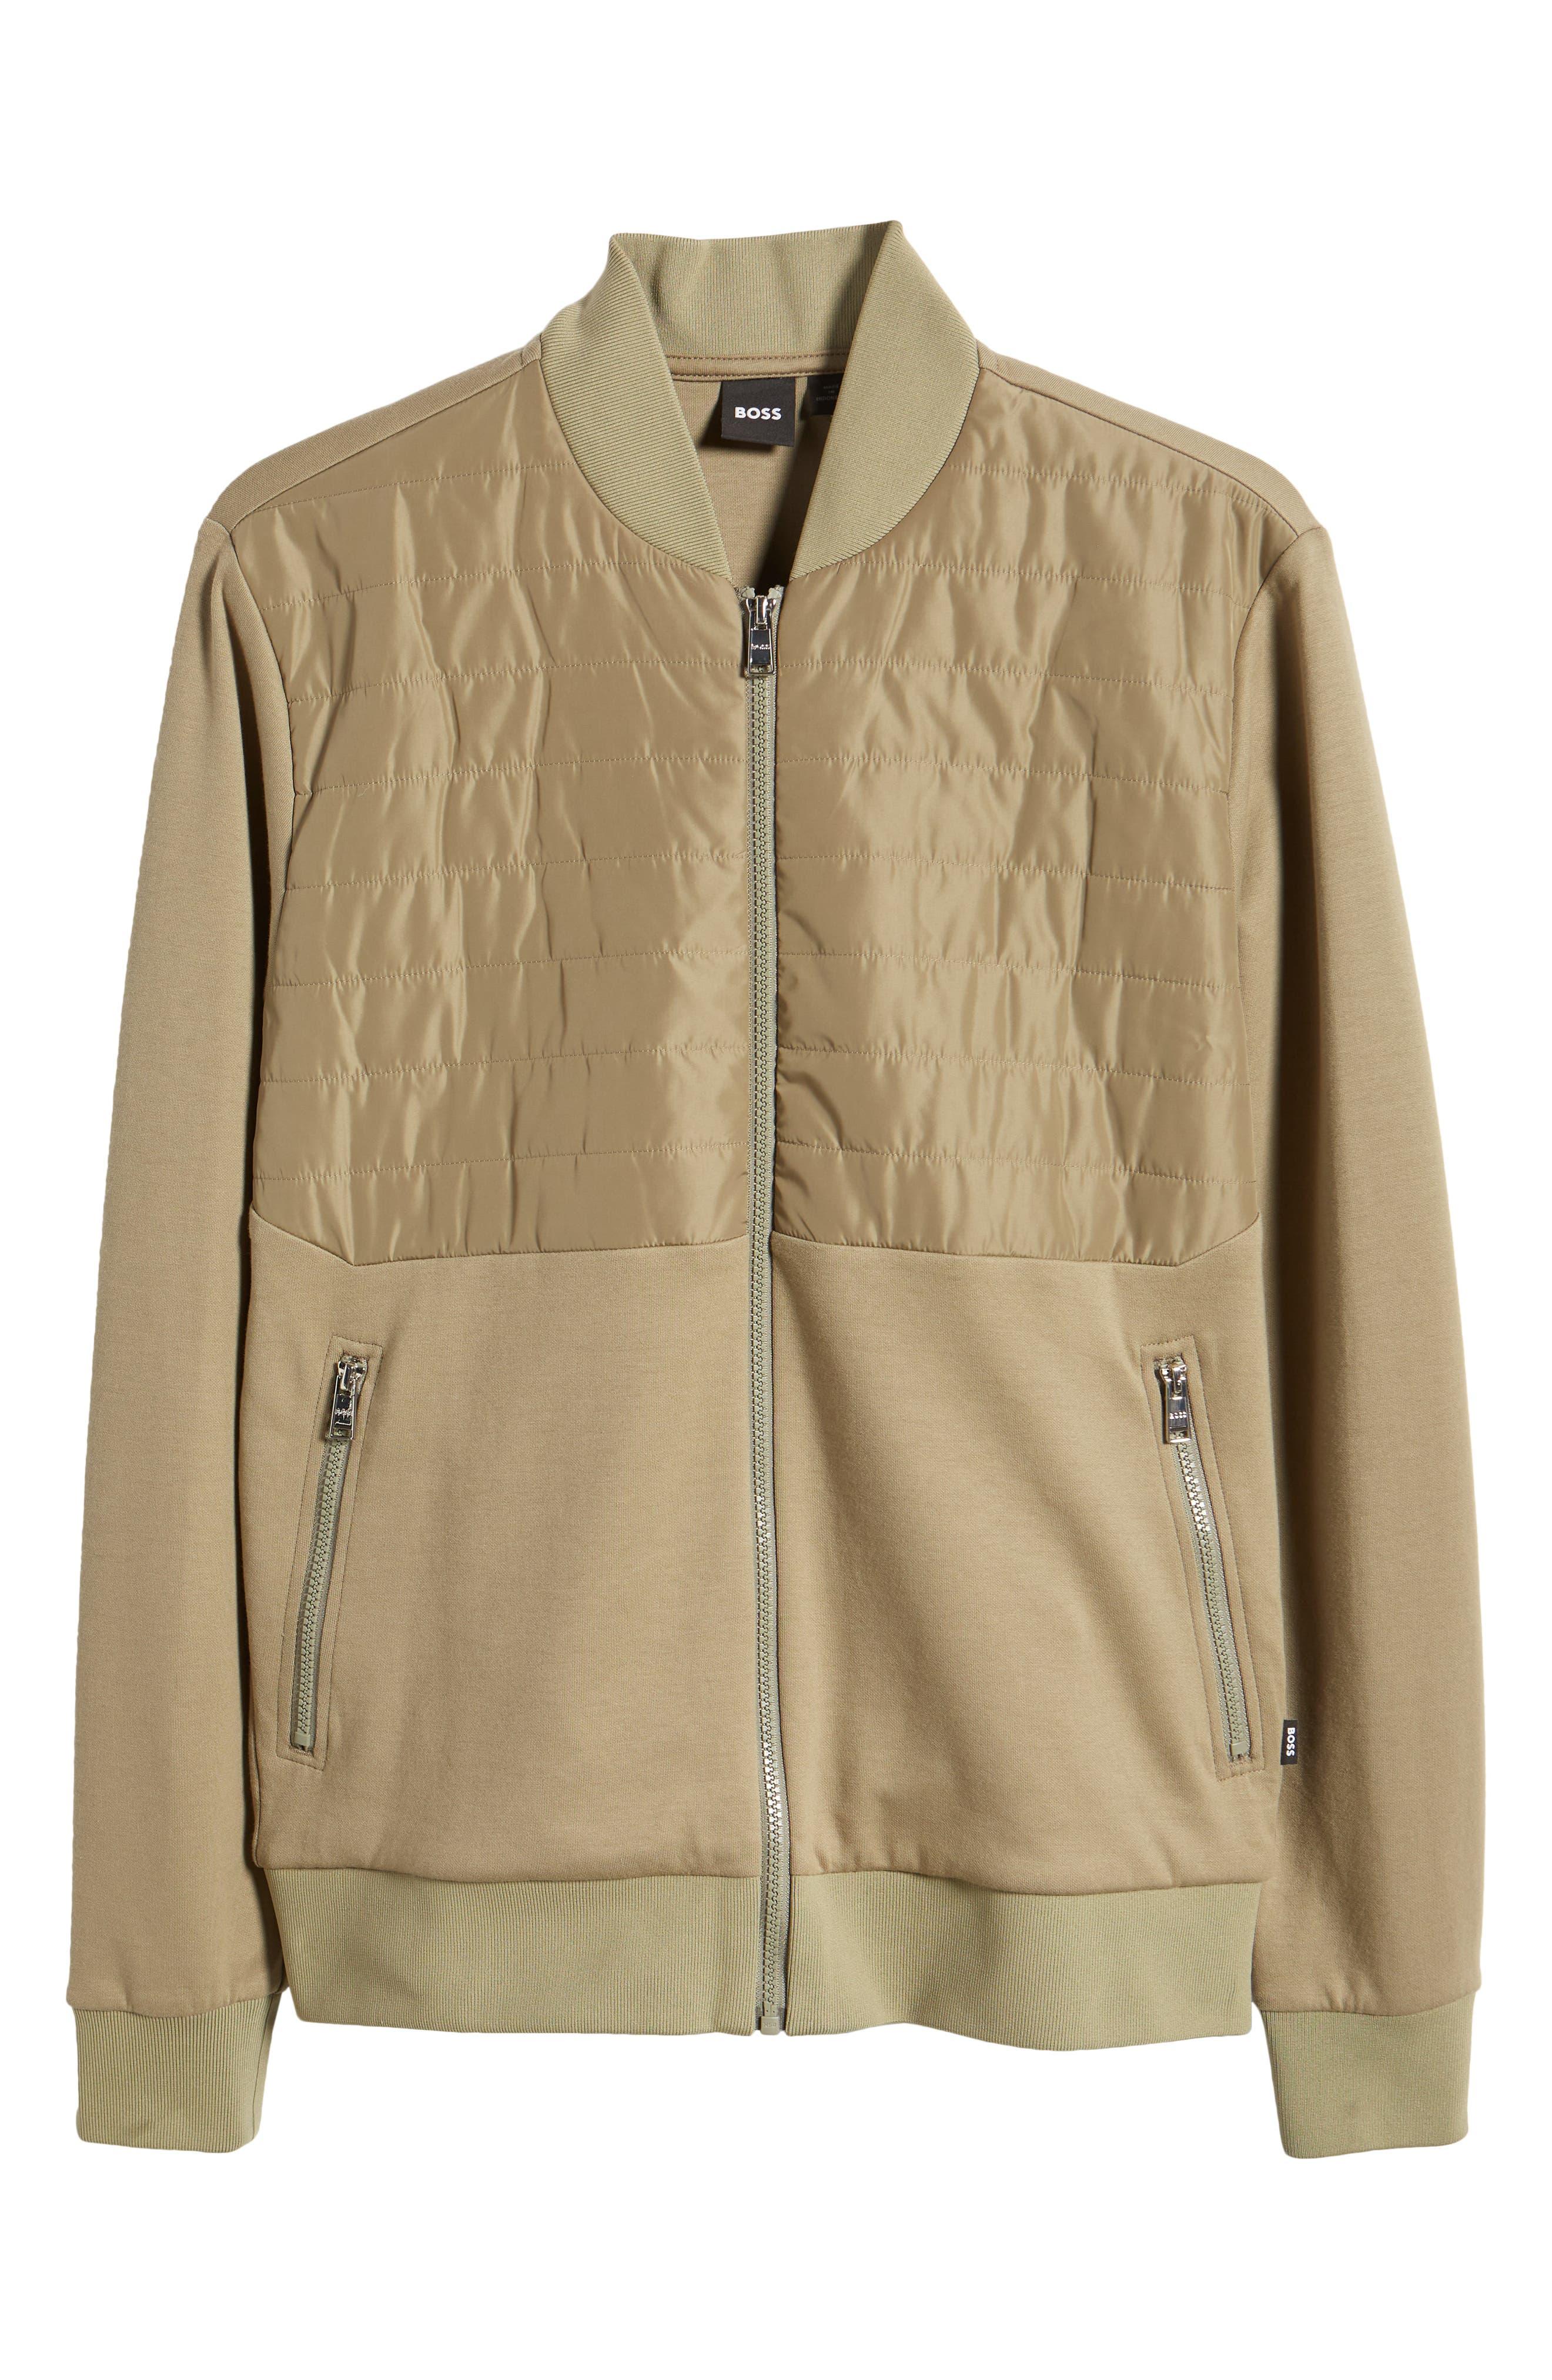 BOSS by HUGO BOSS Skiles Quilted Bomber Jacket in Natural for Men | Lyst